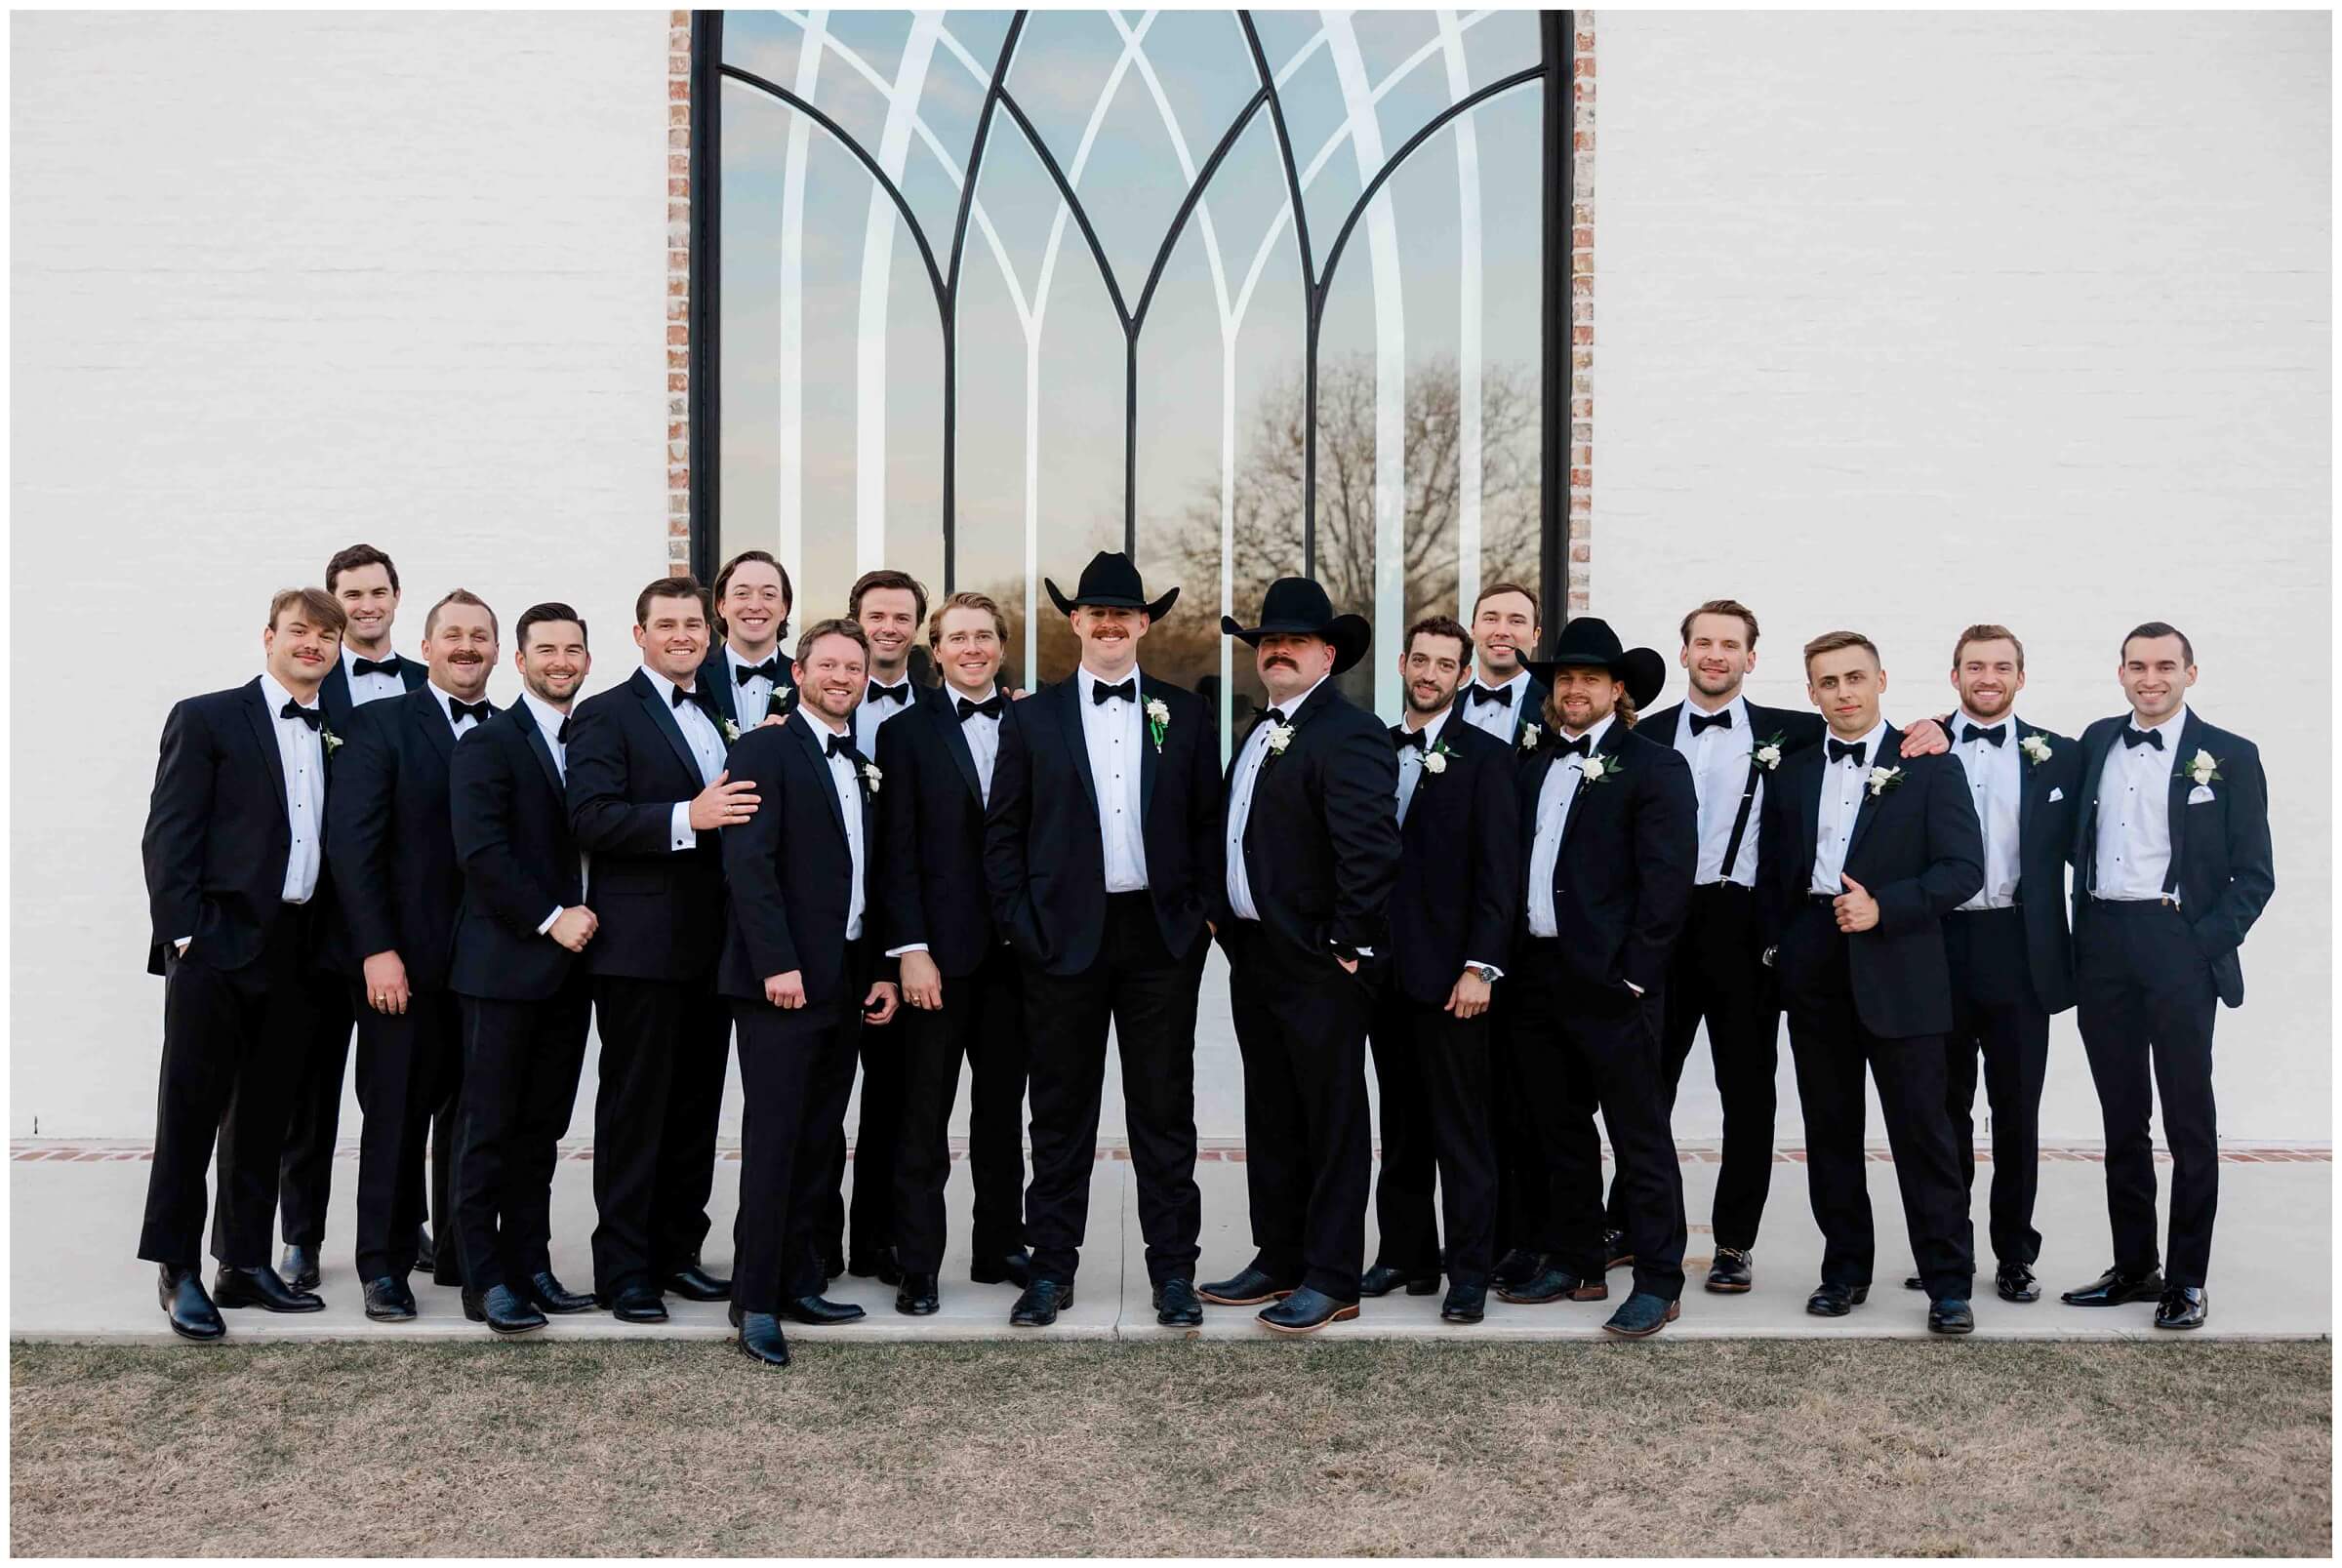 The groomsmen at the Weinberg